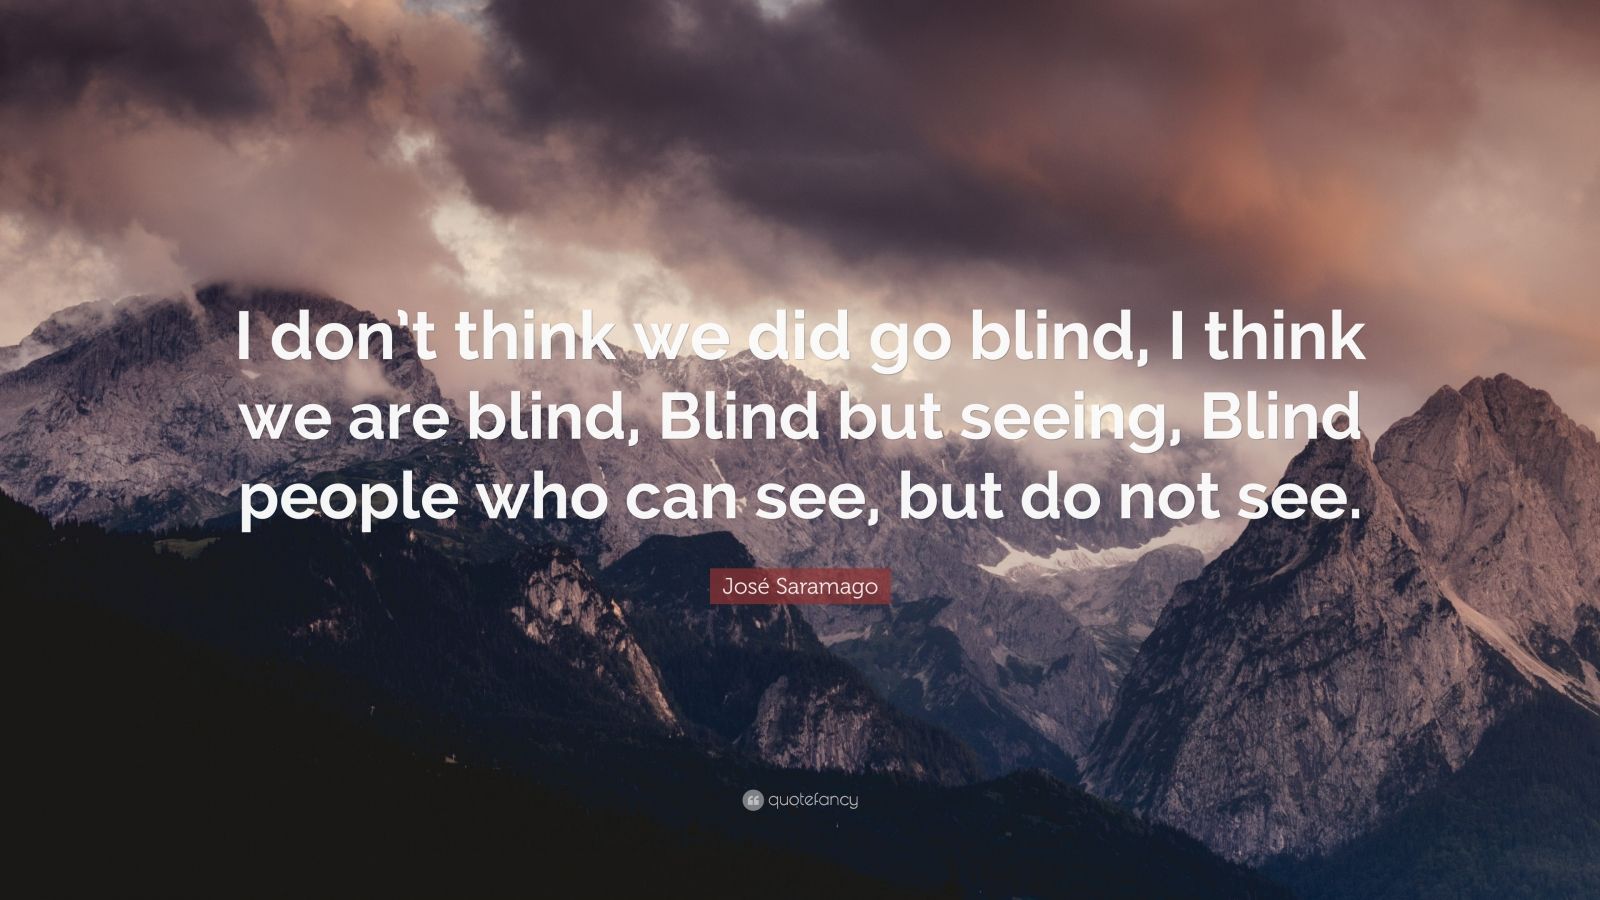 José Saramago Quote: “I don’t think we did go blind, I think we are ...